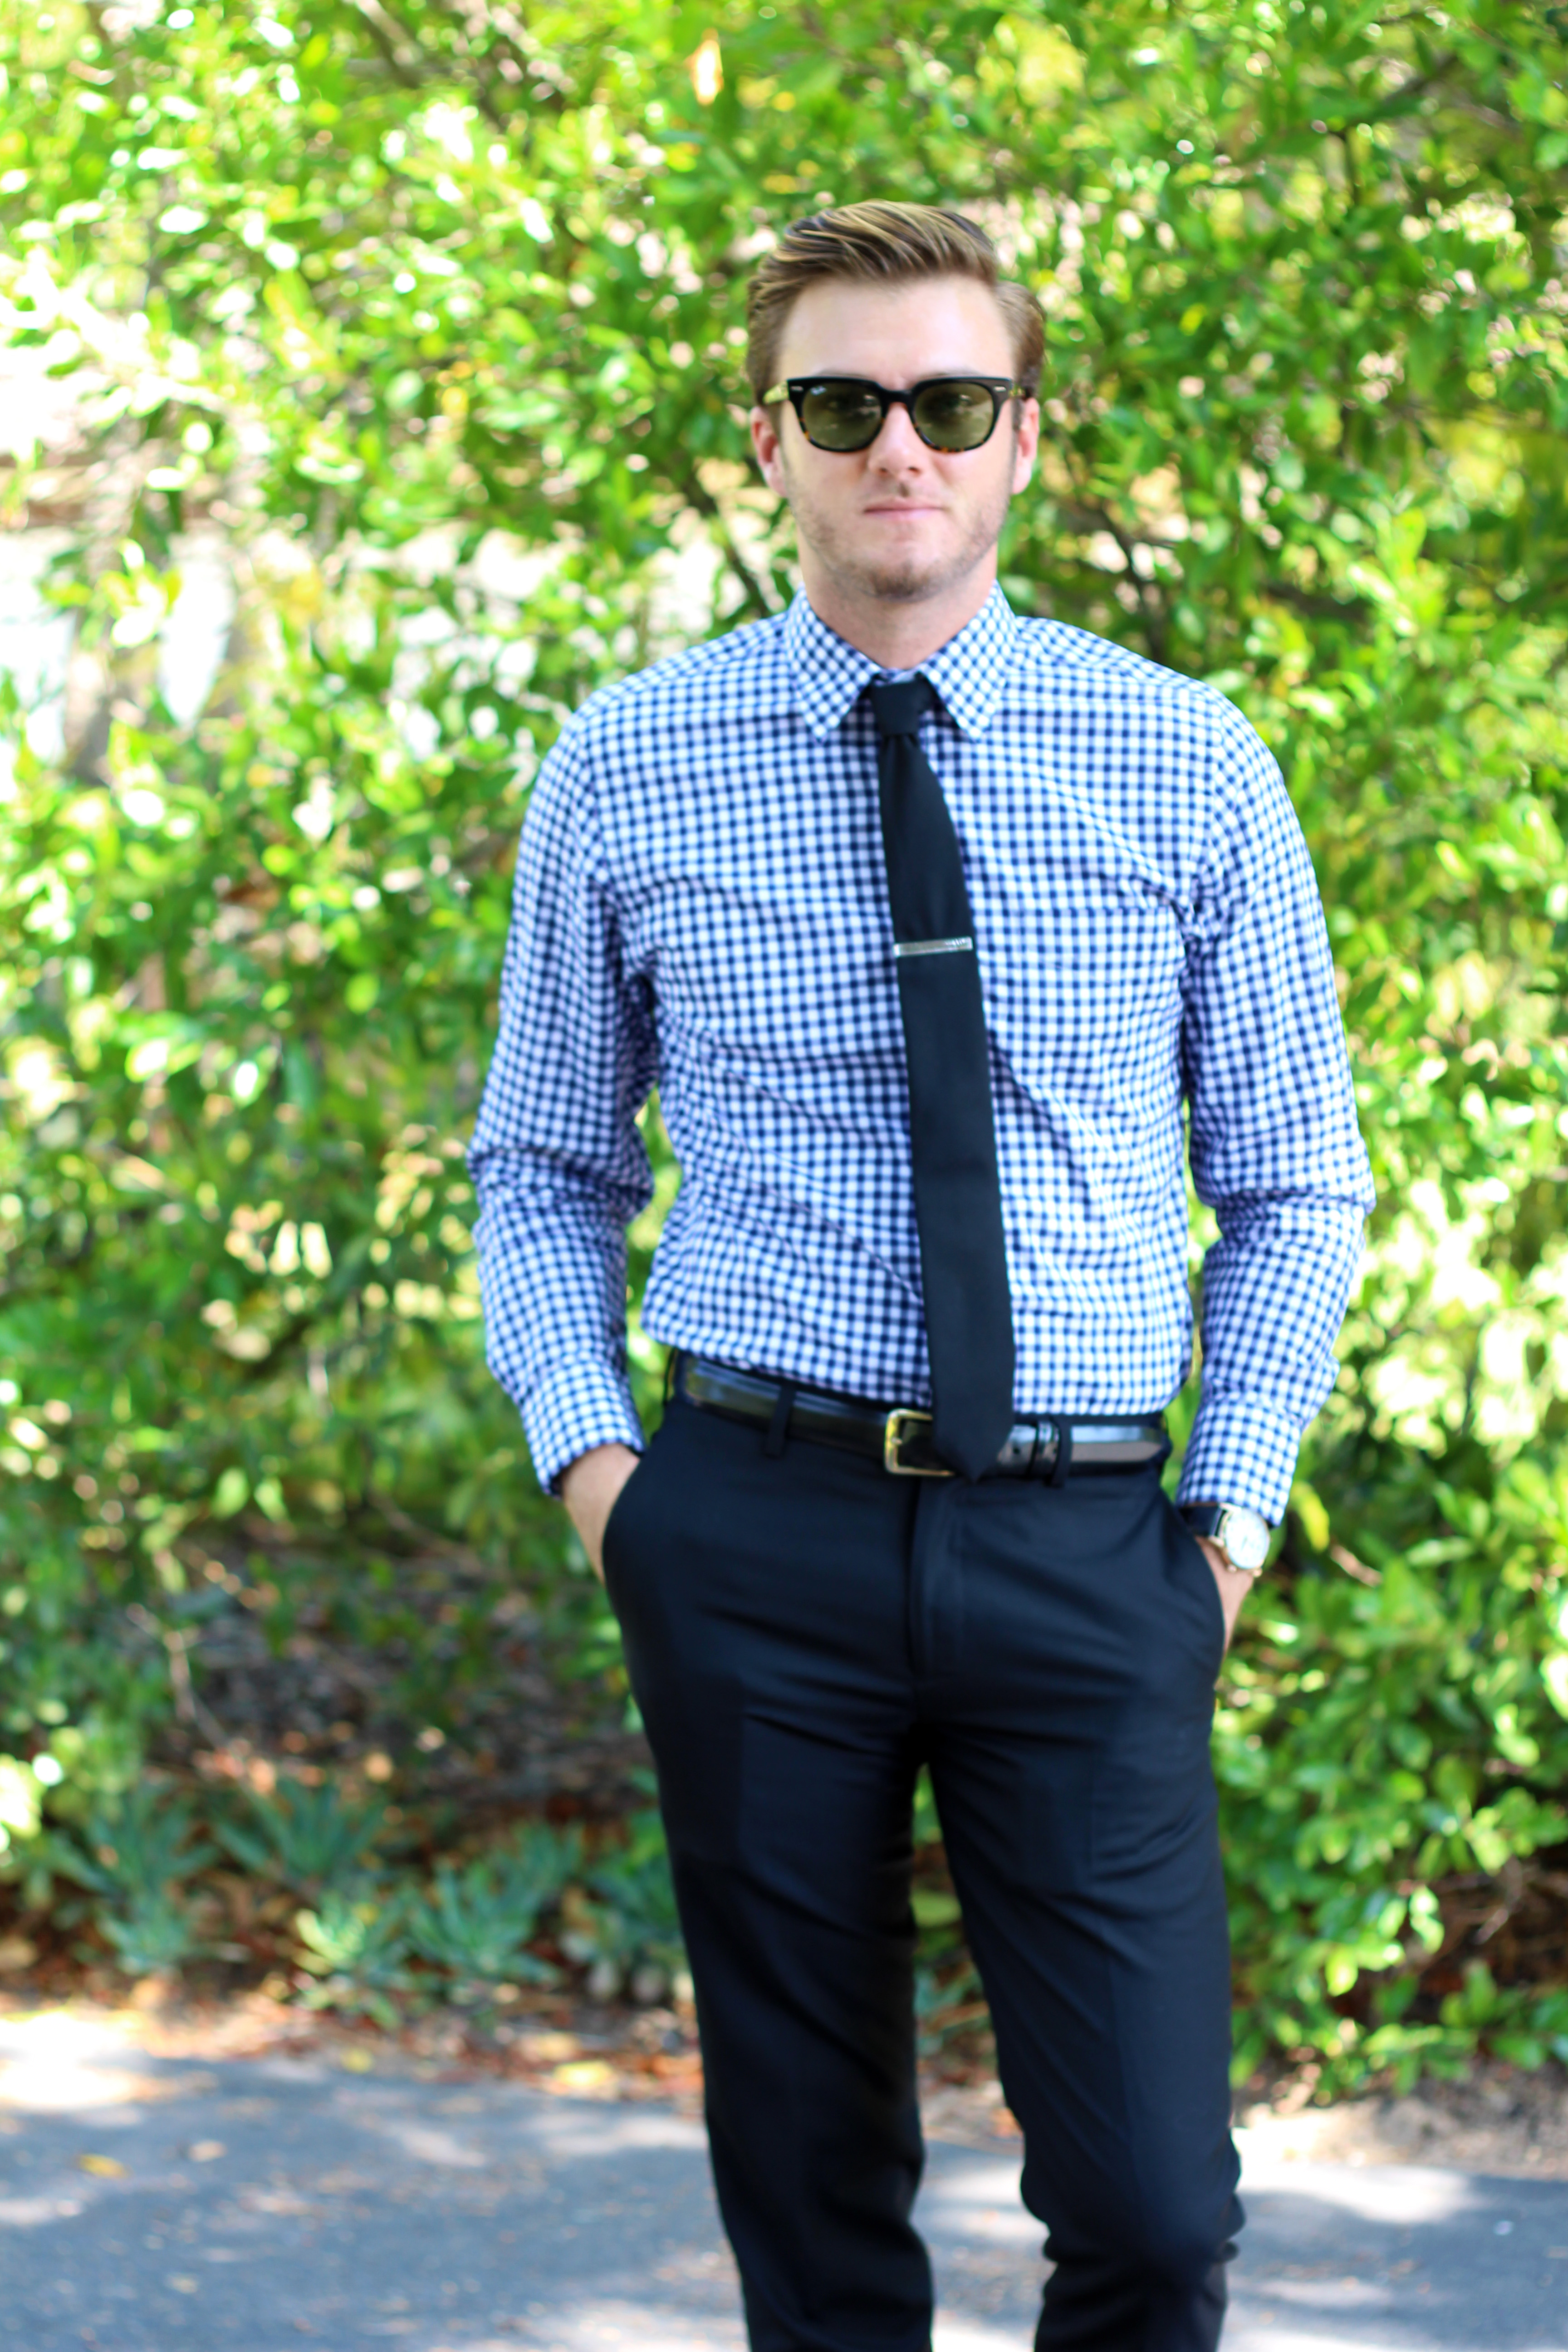 Gingham or Not to Gingham? | Brick & Vine